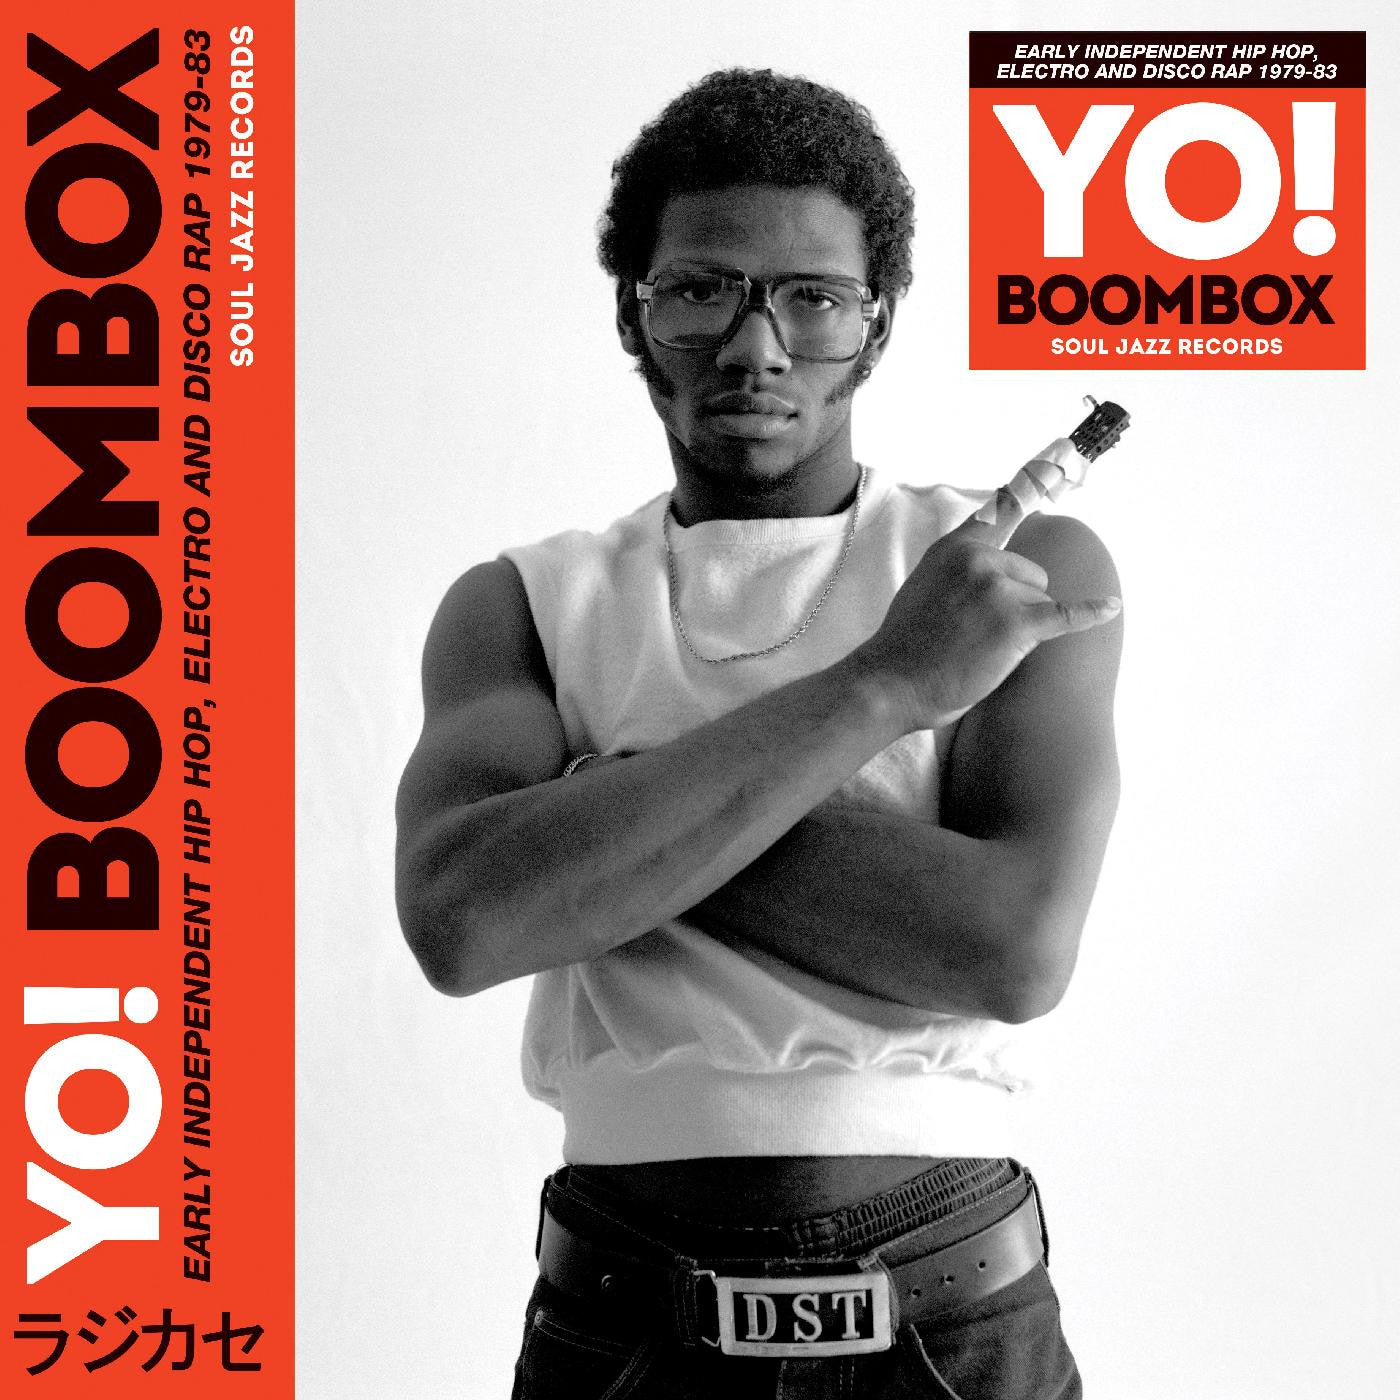 Various Artists – YO! BOOMBOX: Early Independent Hip Hop, Electro And Disco Rap 1979-83 [IMPORT 2xLP w/ 7"] - New LP